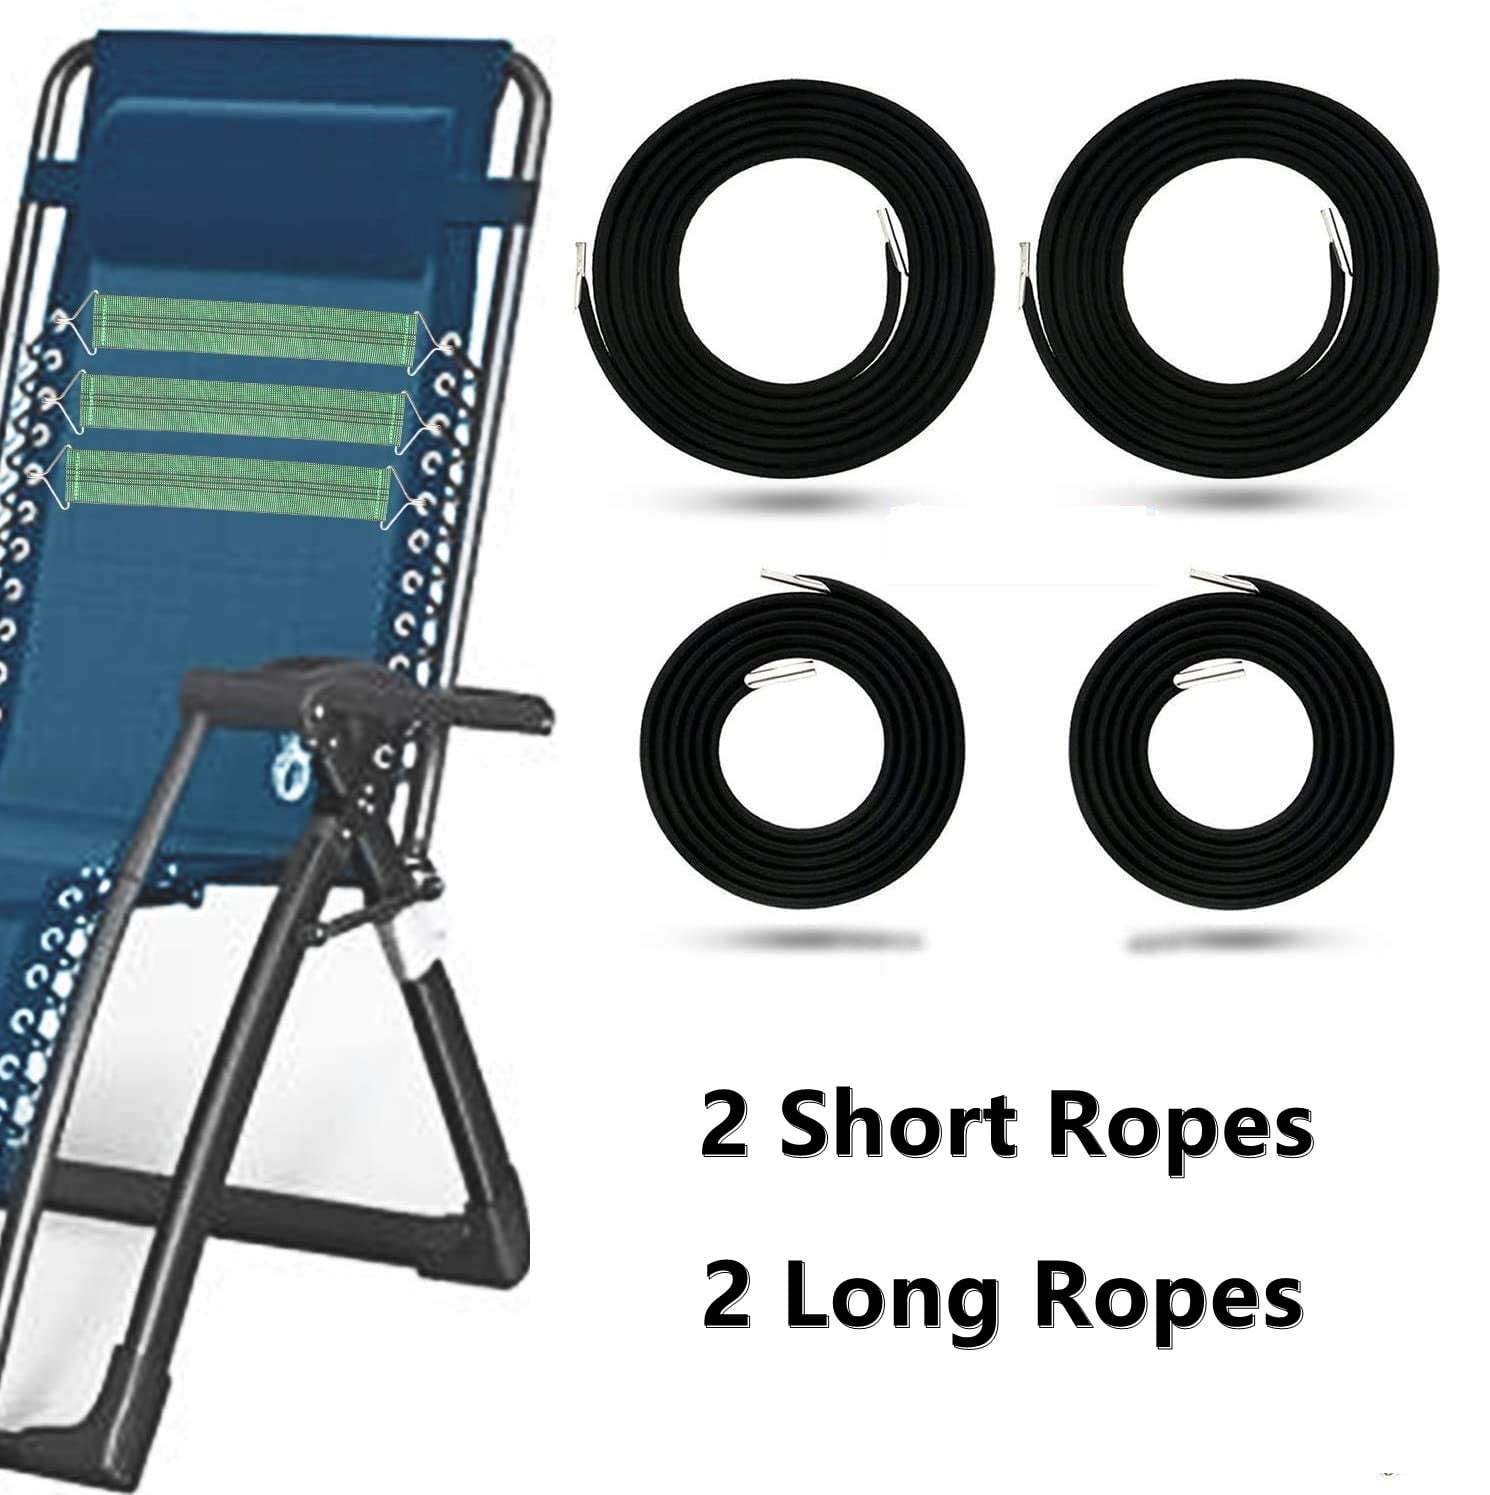 4X Ropes Elastic Cord For Recliner Chairs Garden Lounger Chair xfz 